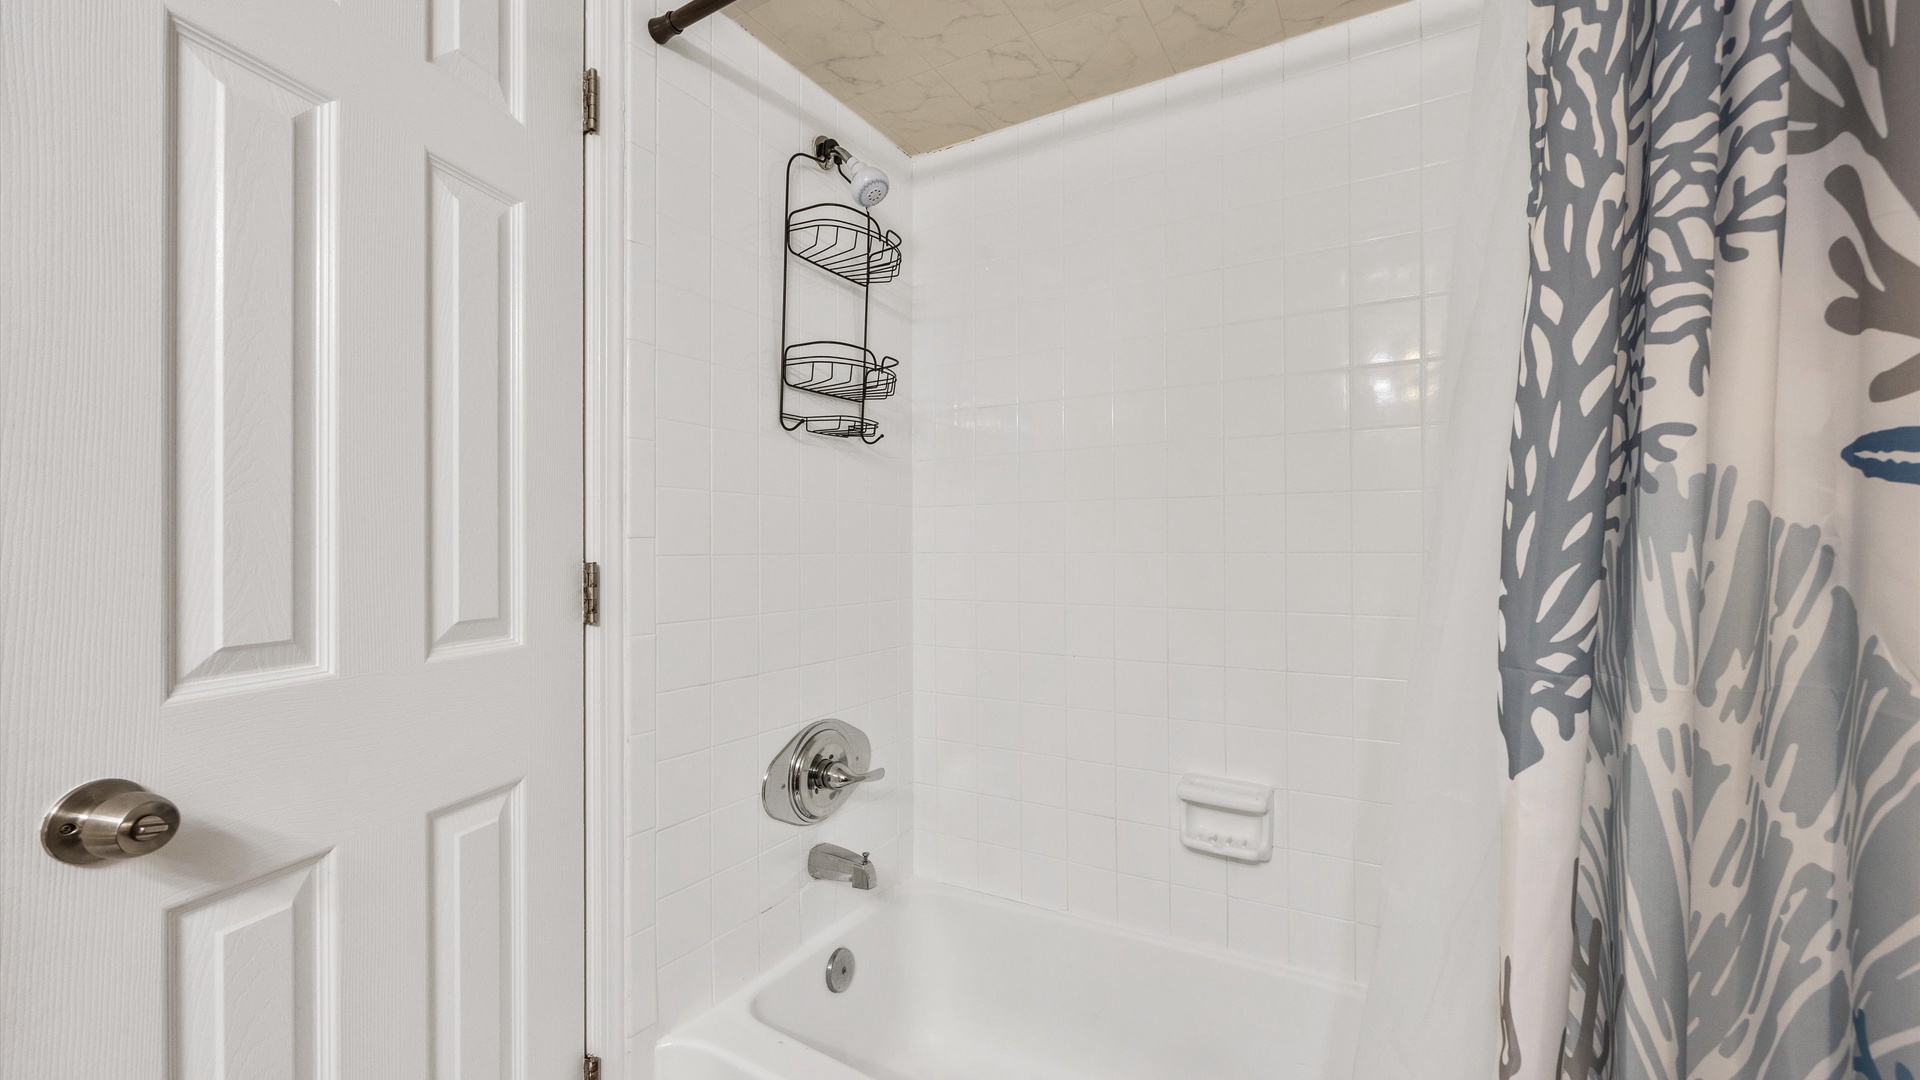 The second full bath includes a single vanity & shower/tub combo